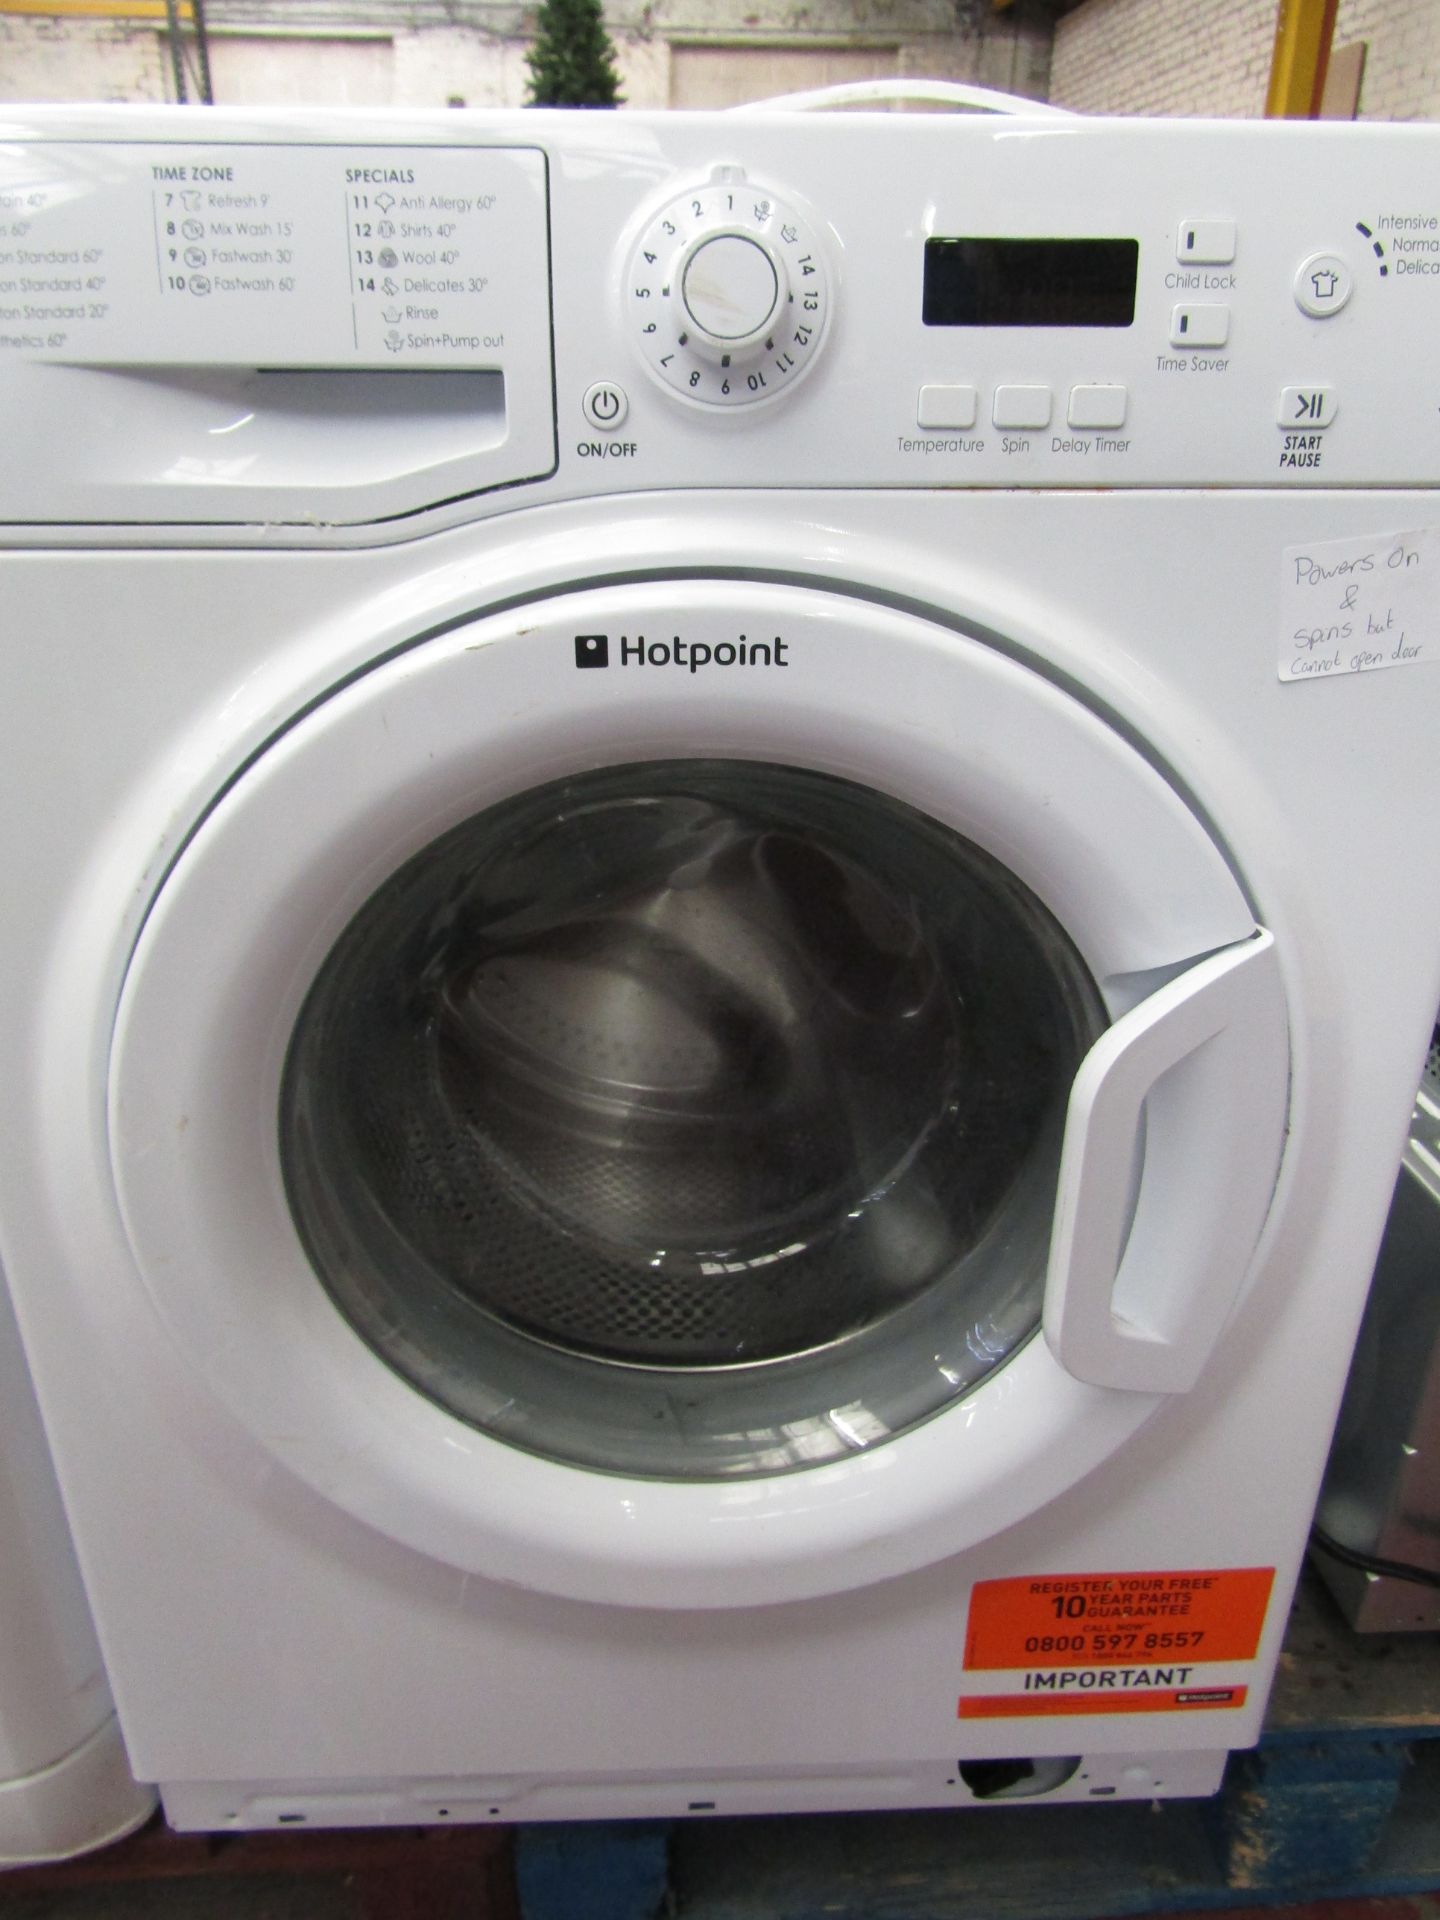 Hotpoint WMXTF 942 washing machine, powers up and spins but cannot open door, may be locked due to